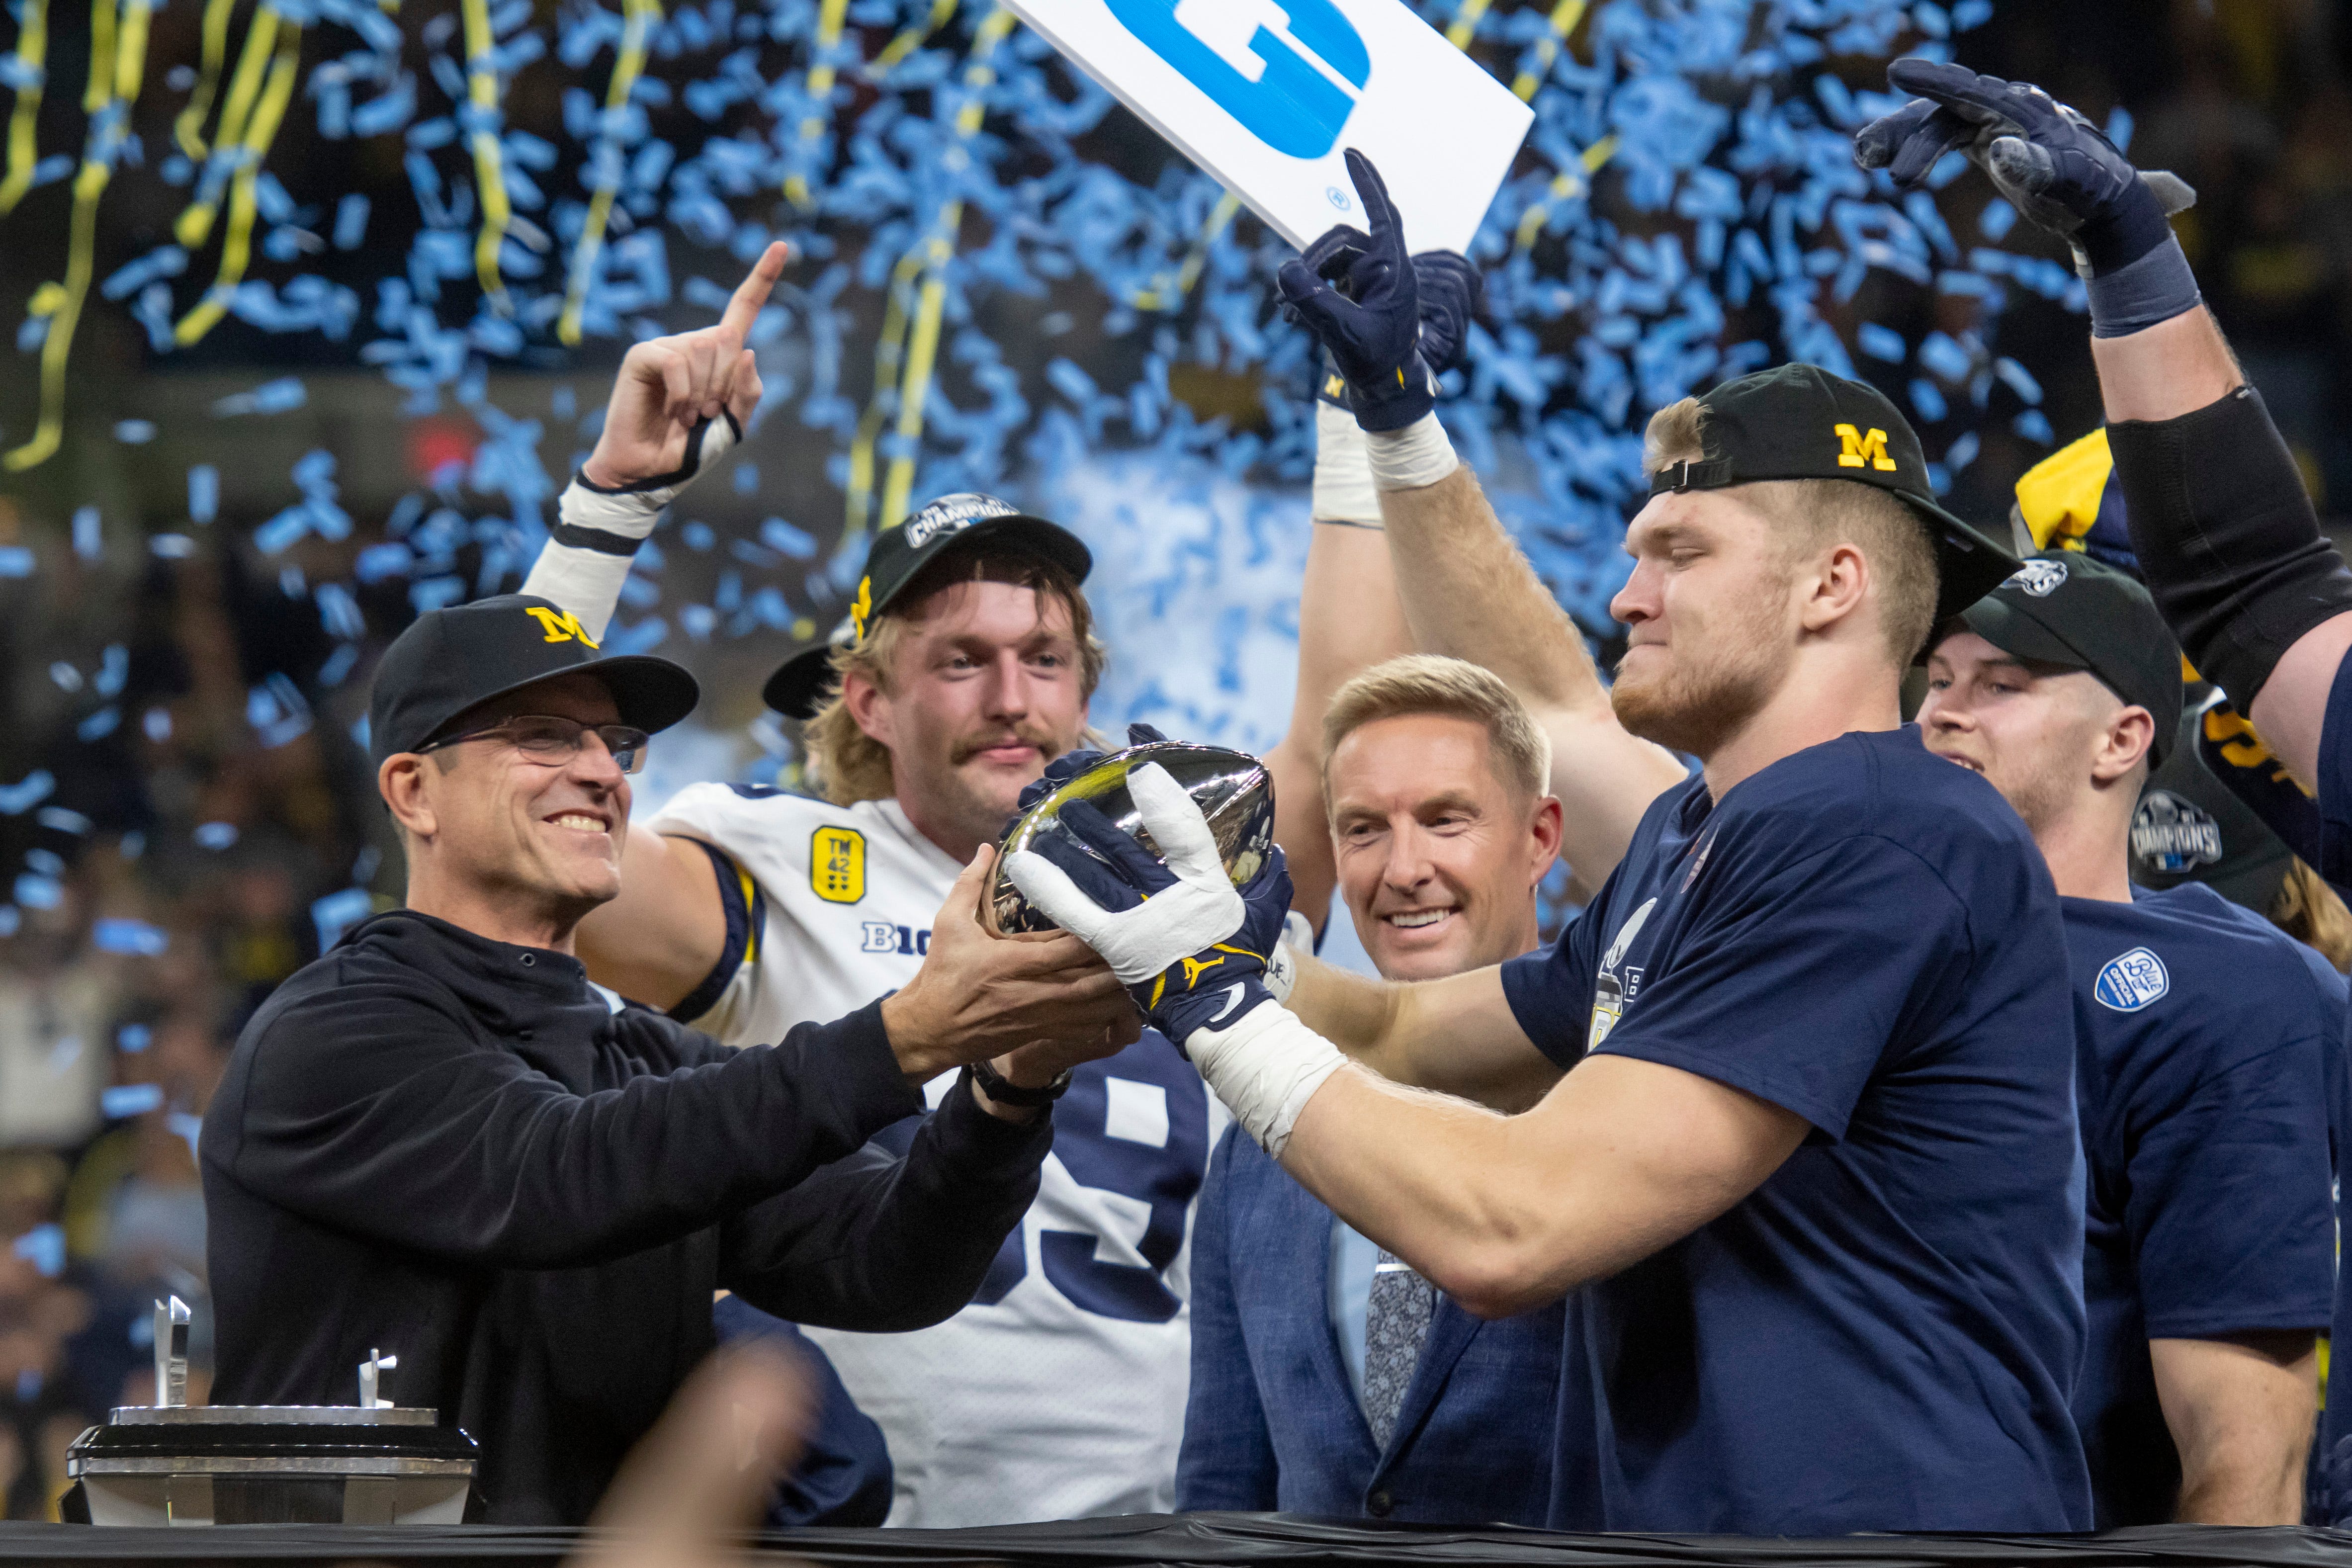 Head coach Jim Harbaugh hands the championship trophy to defensive end Aidan Hutchinson after the University of Michigan defeated the University of Iowa 42-3 to win the Big Ten championship at Lucas Oil Stadium in Indianapolis, December 5, 2021.